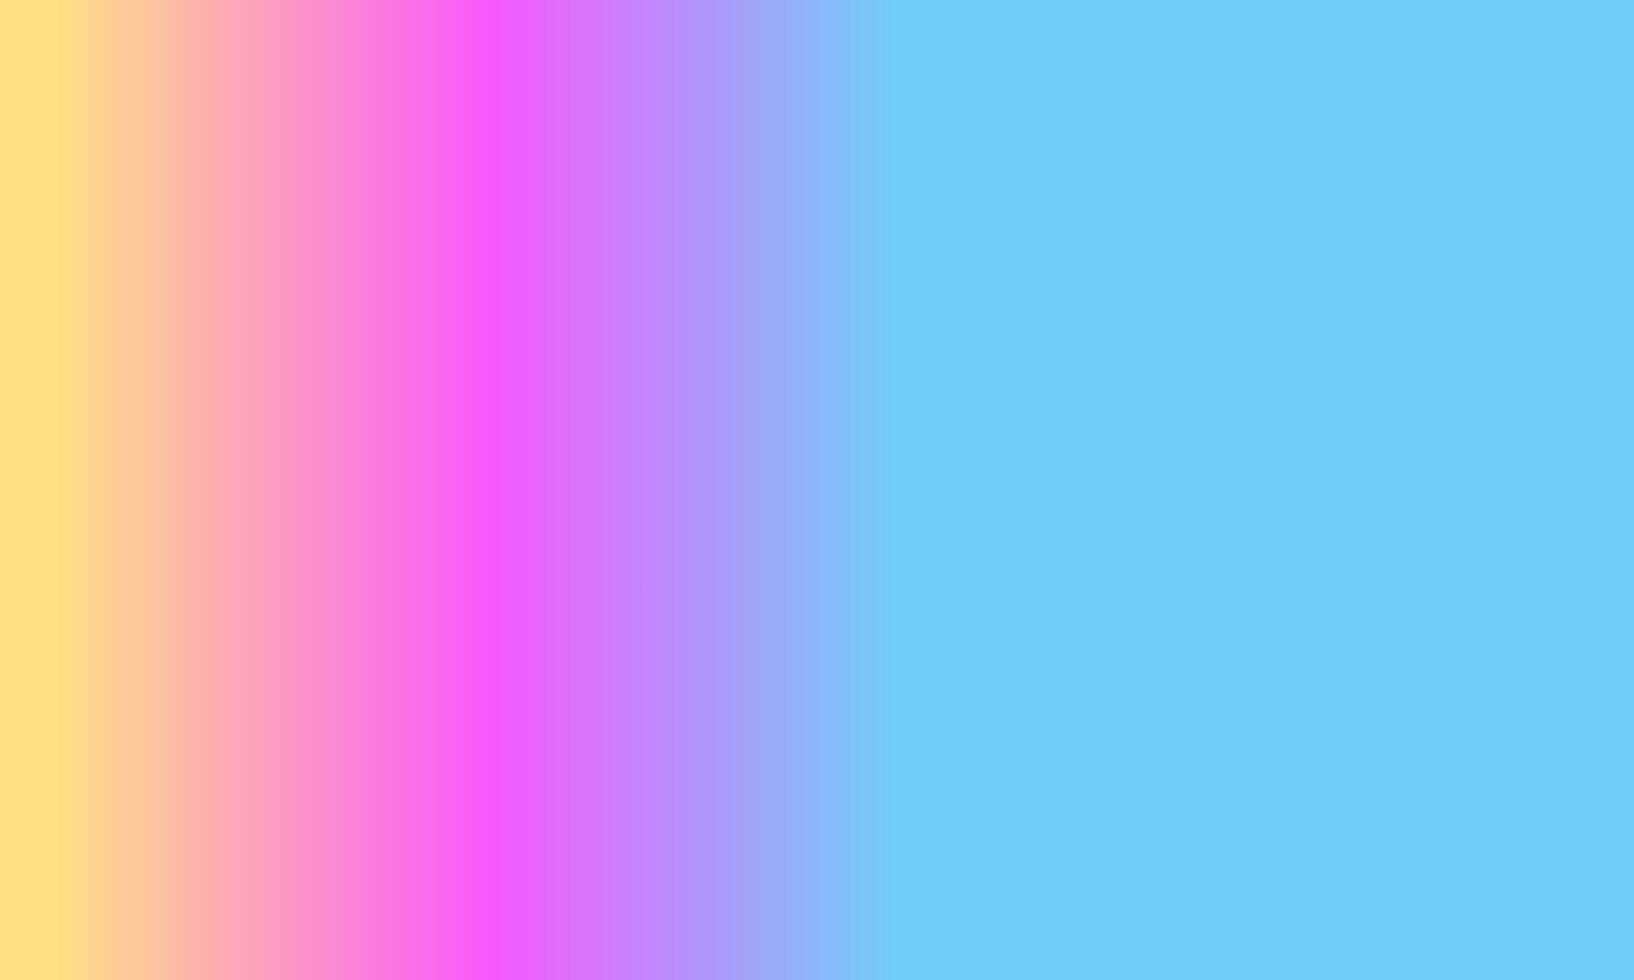 Design simple pink,blue and yellow gradient color illustration background very cool photo